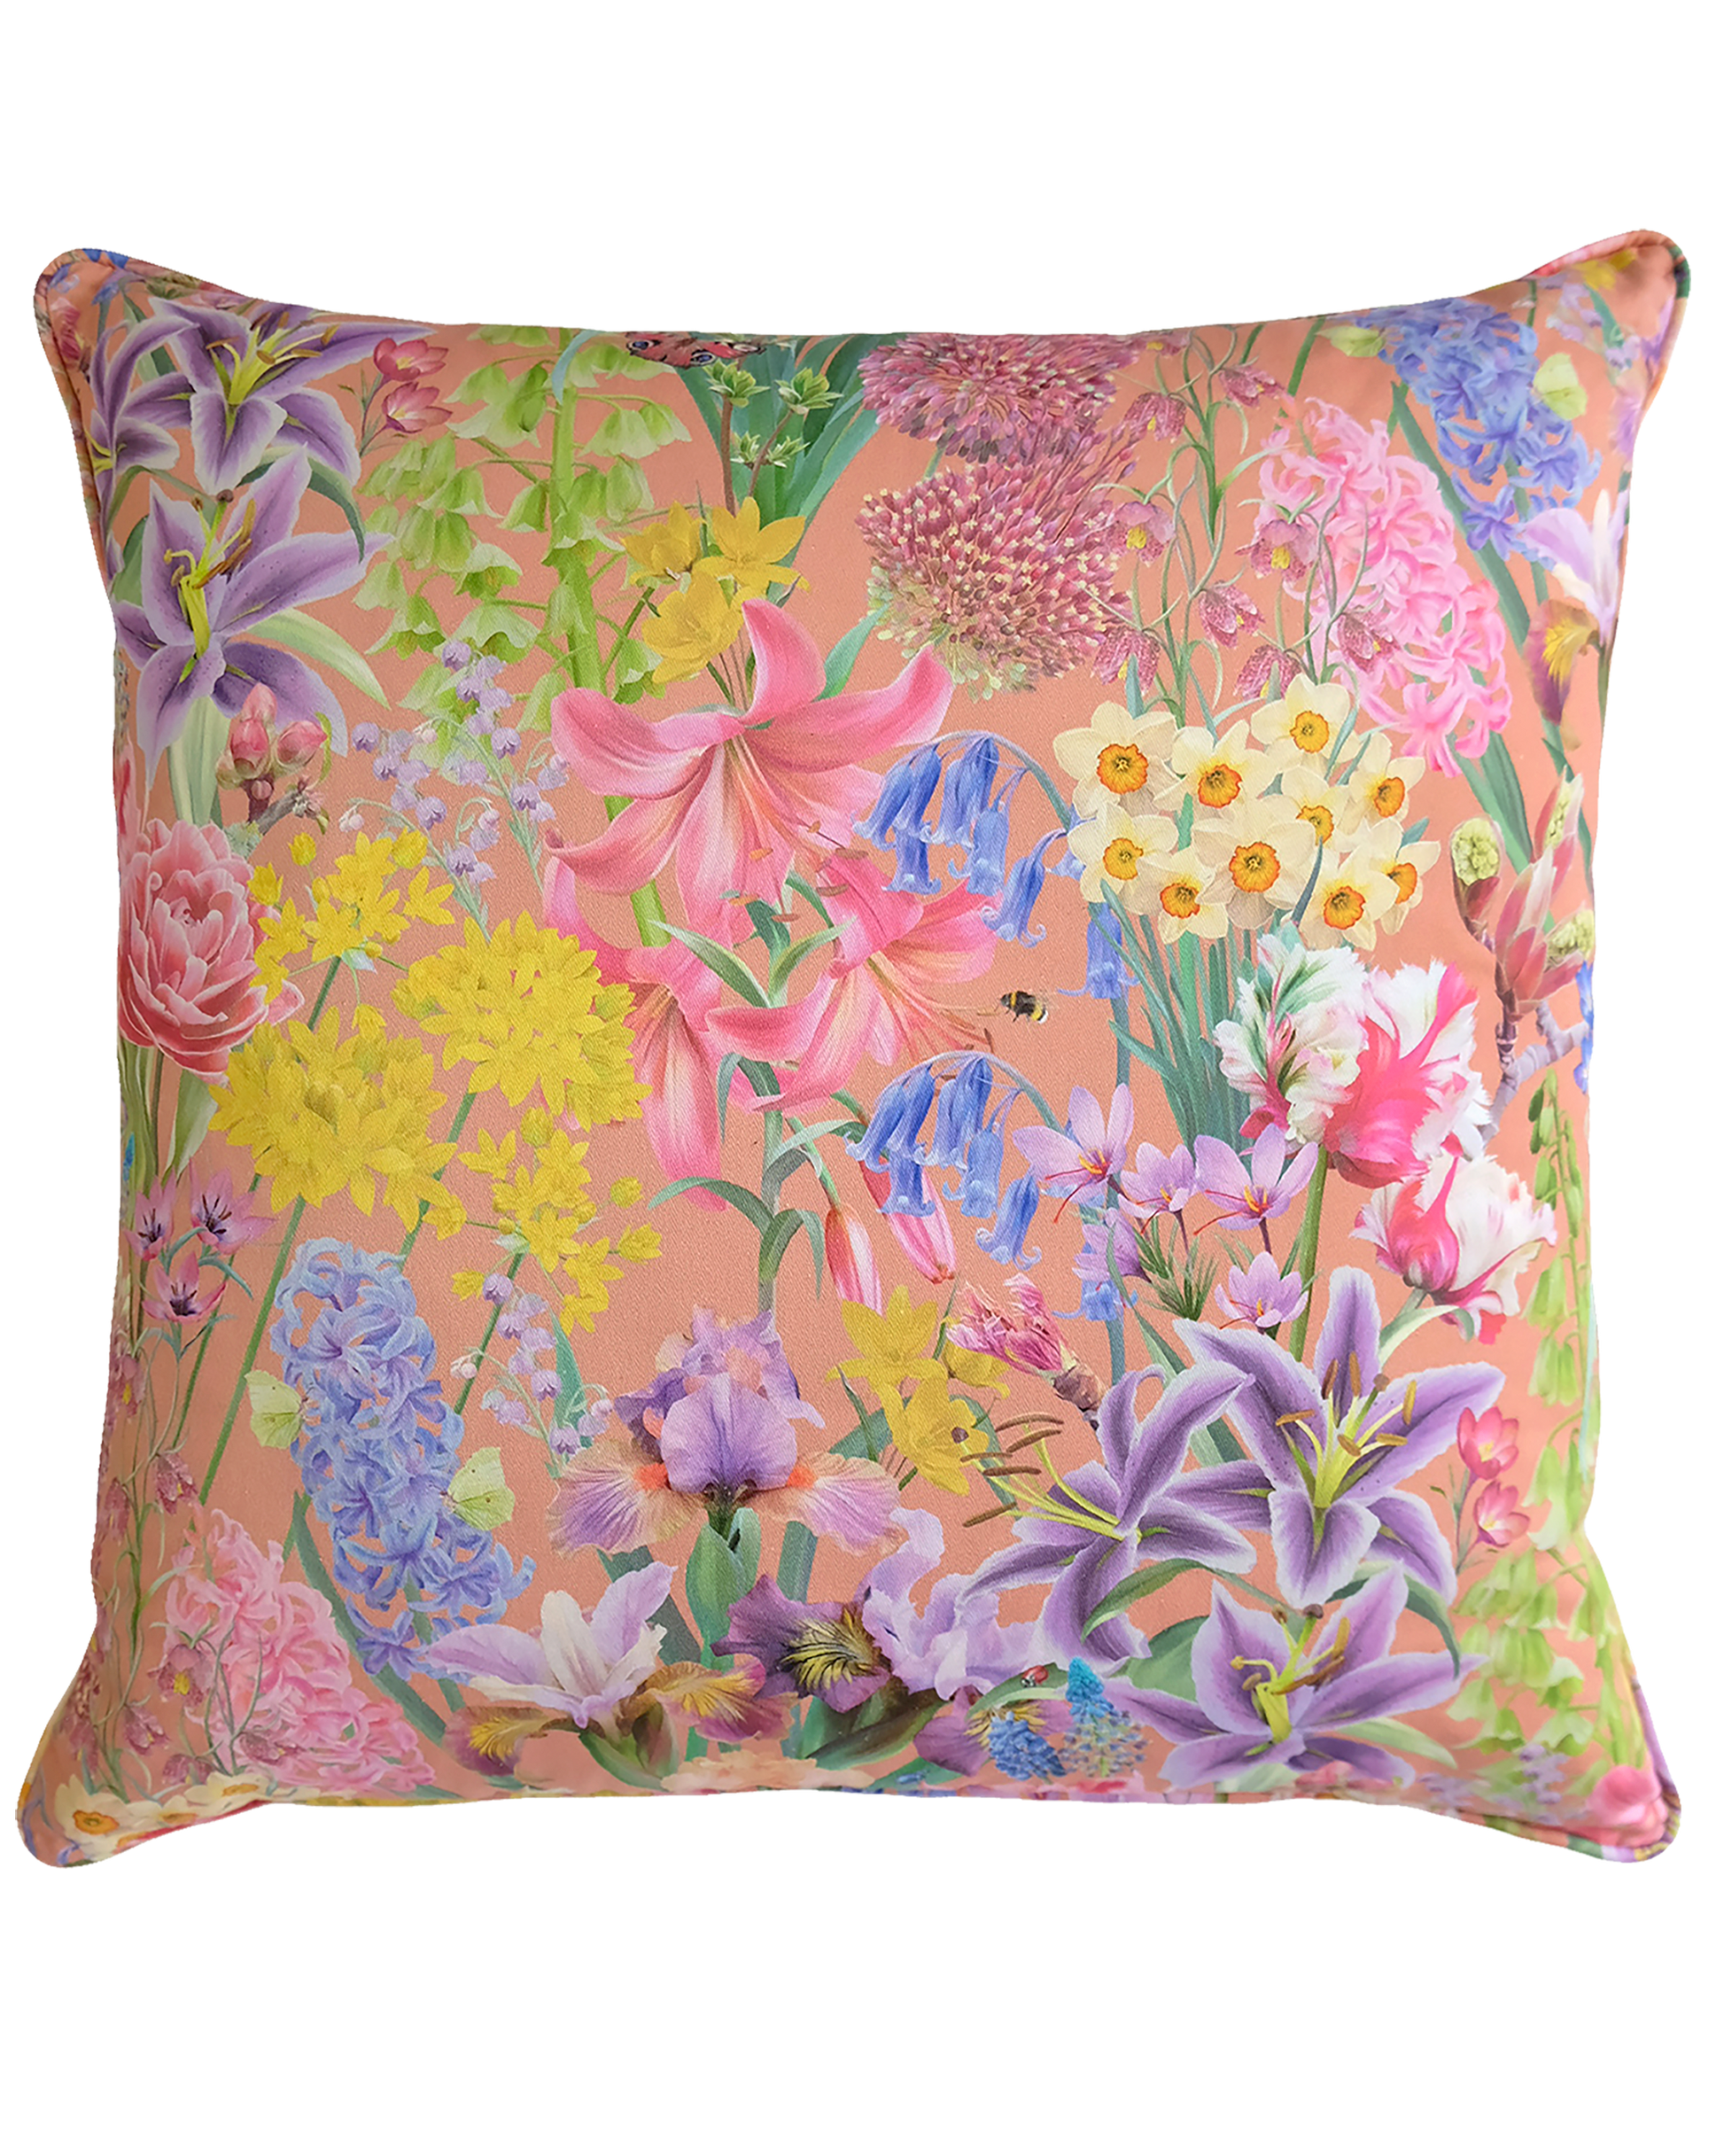 Bright peach spring floral designer piped cushion for maximal interiors in organic sustainable fabrics